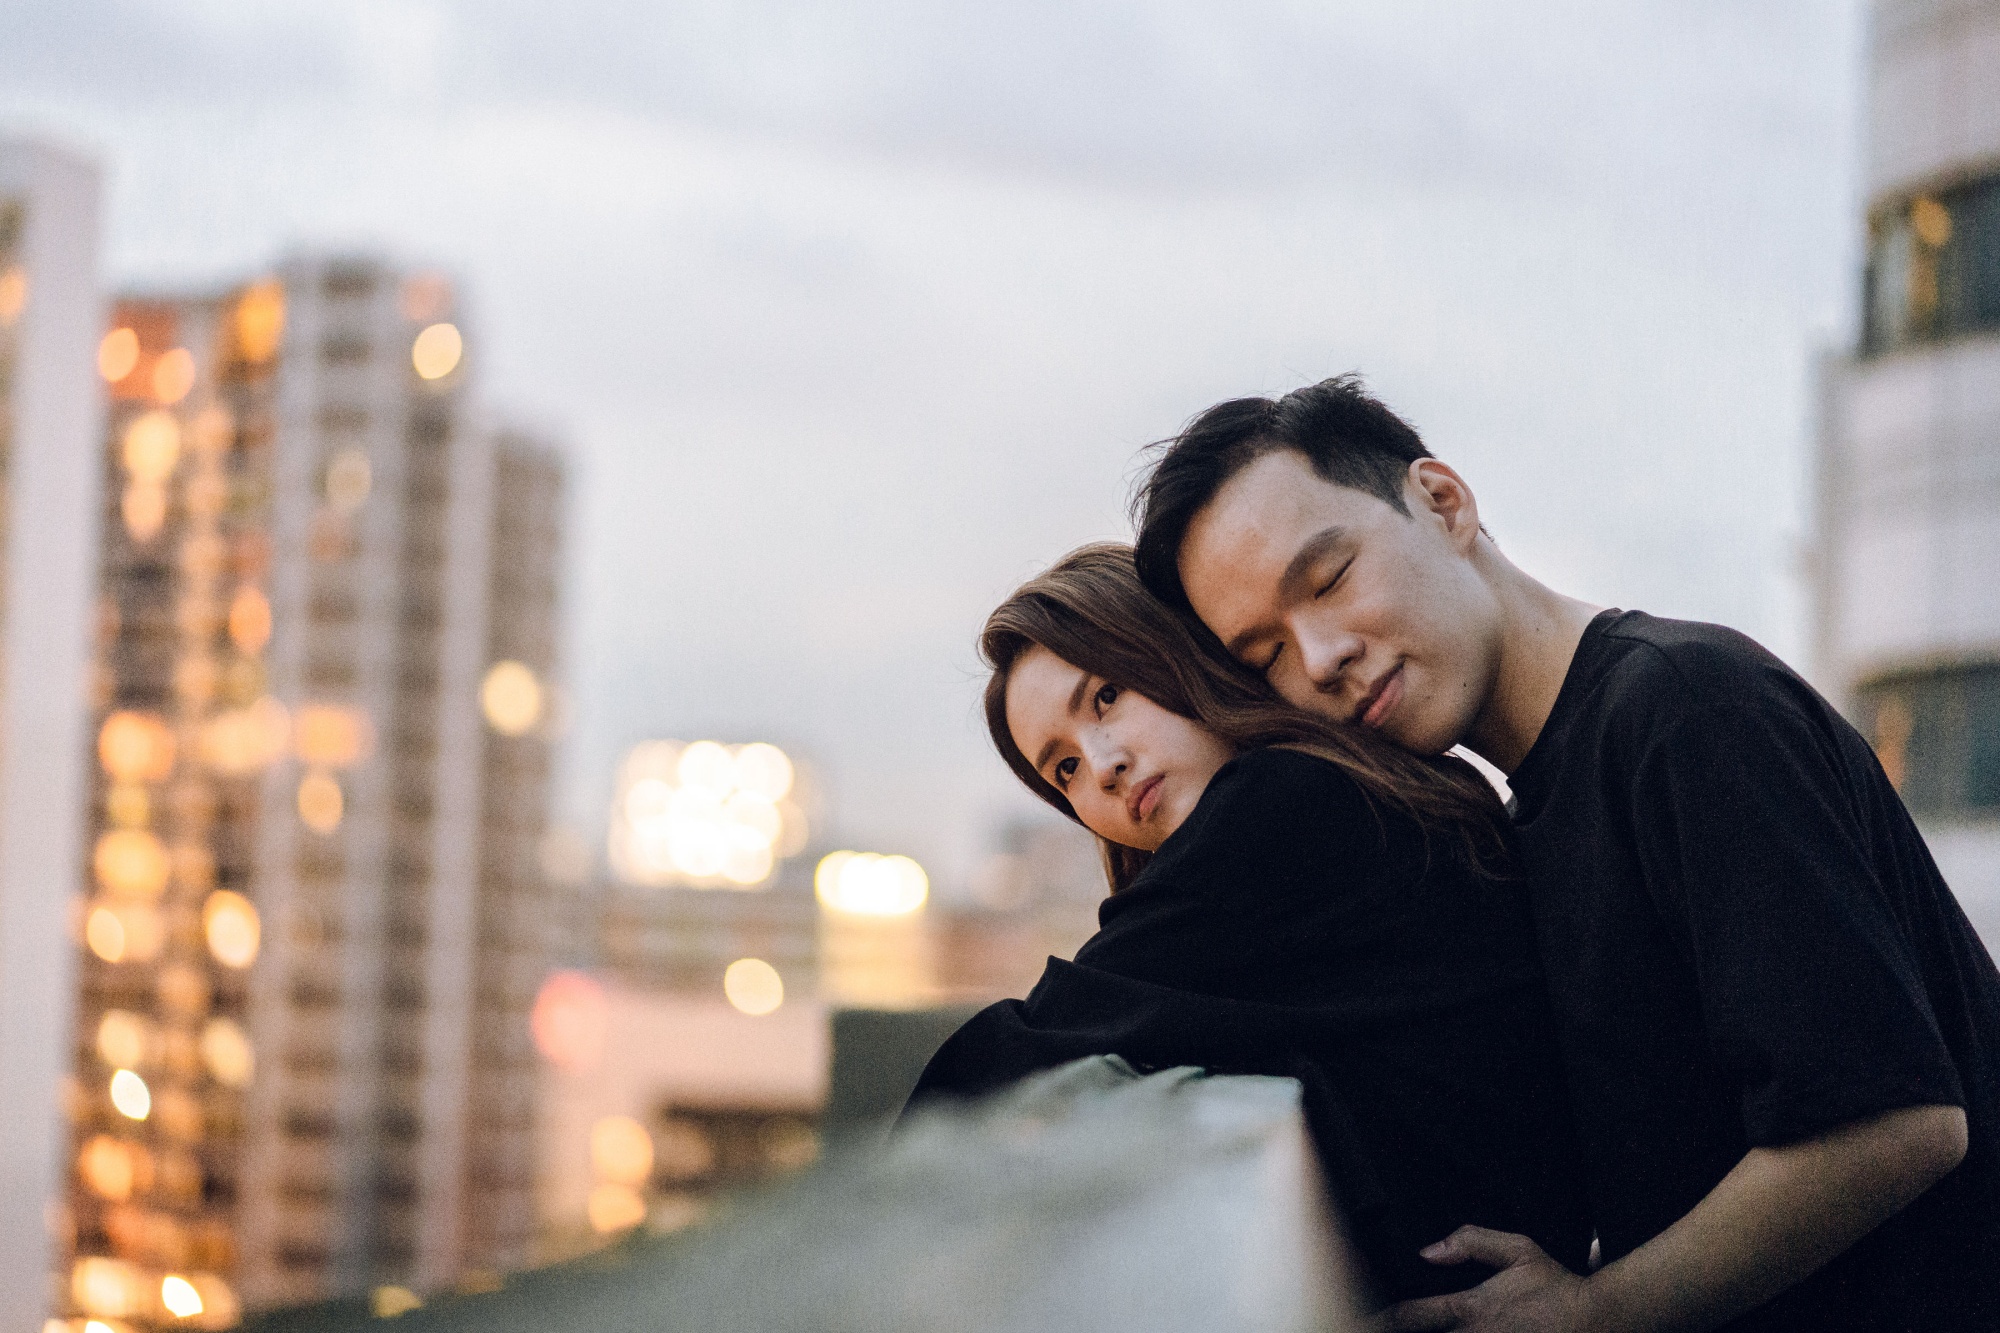 Prewedding Photoshoot At East Coast Park And Industrial Rooftop by Michael on OneThreeOneFour 37